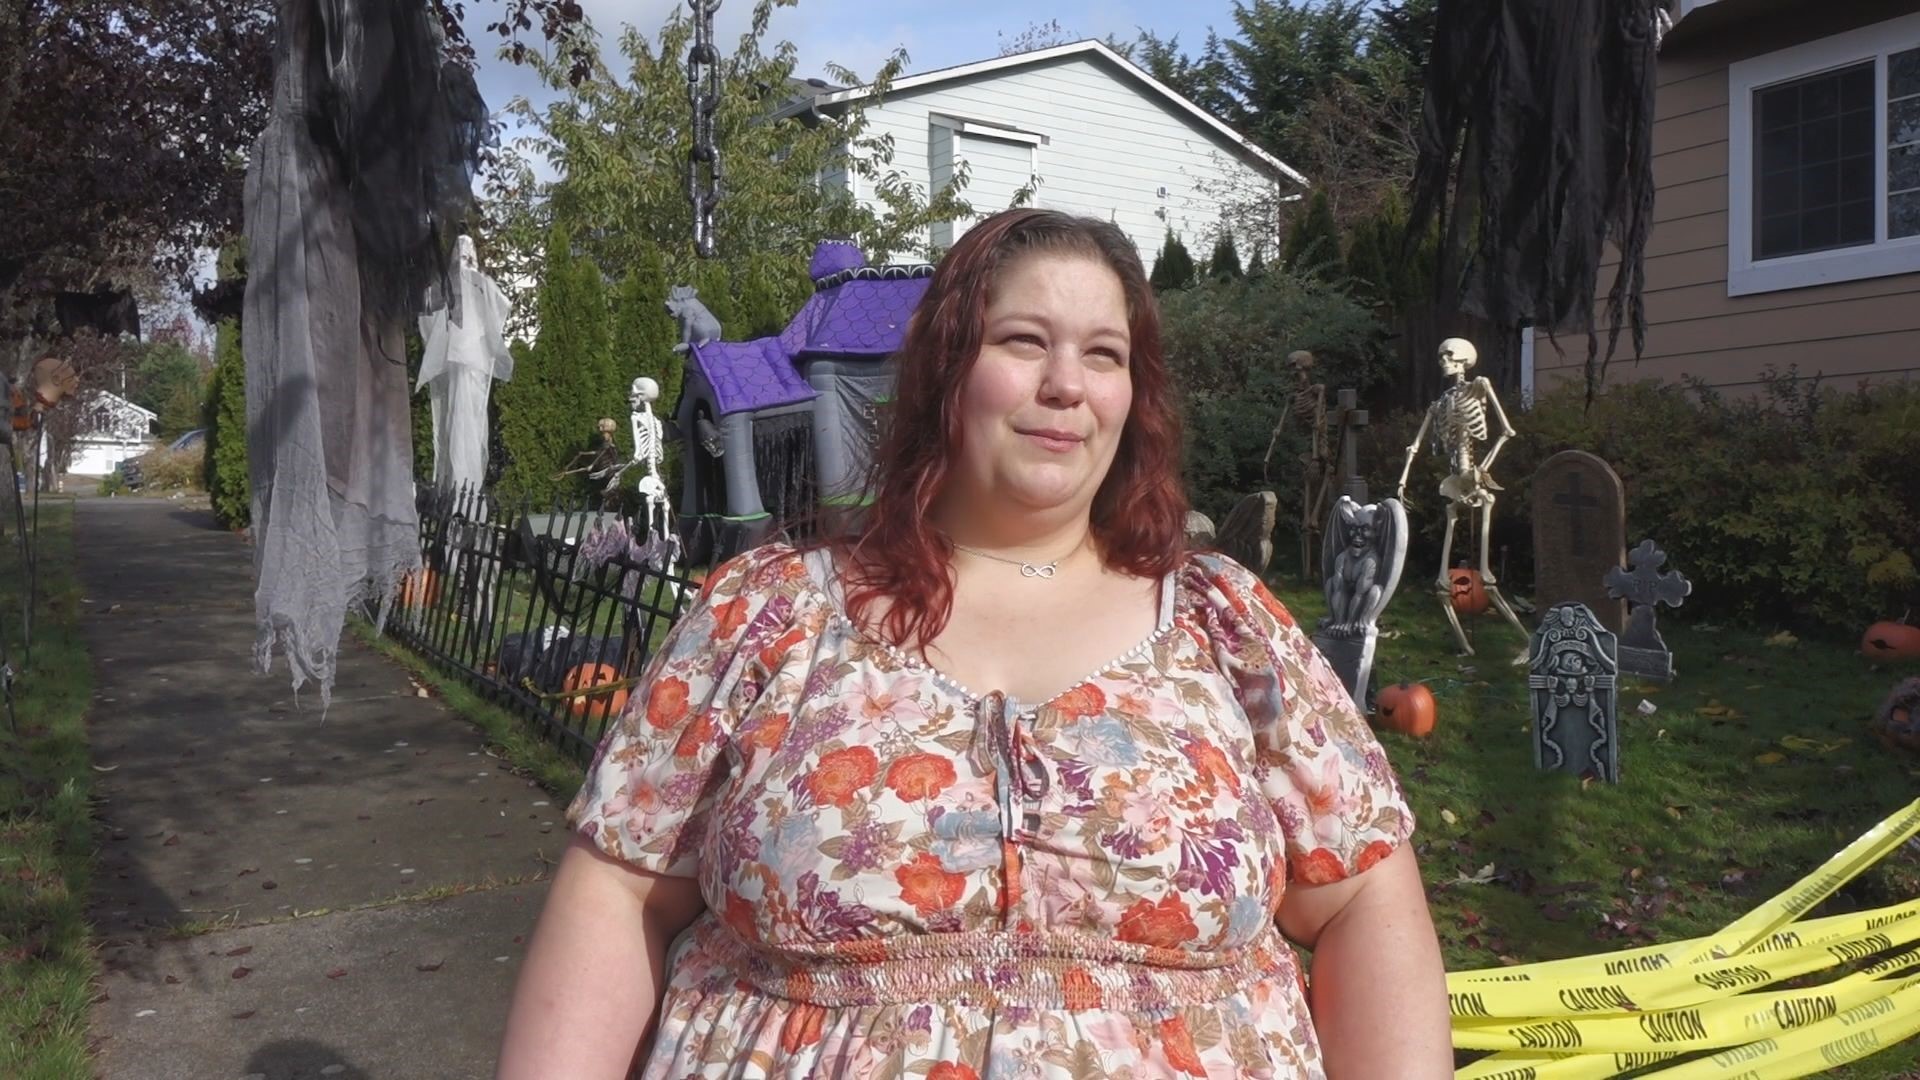 Brandi Smith and her family are so passionate about Halloween they dedicated their time to celebrating it during the most uncertain of times.